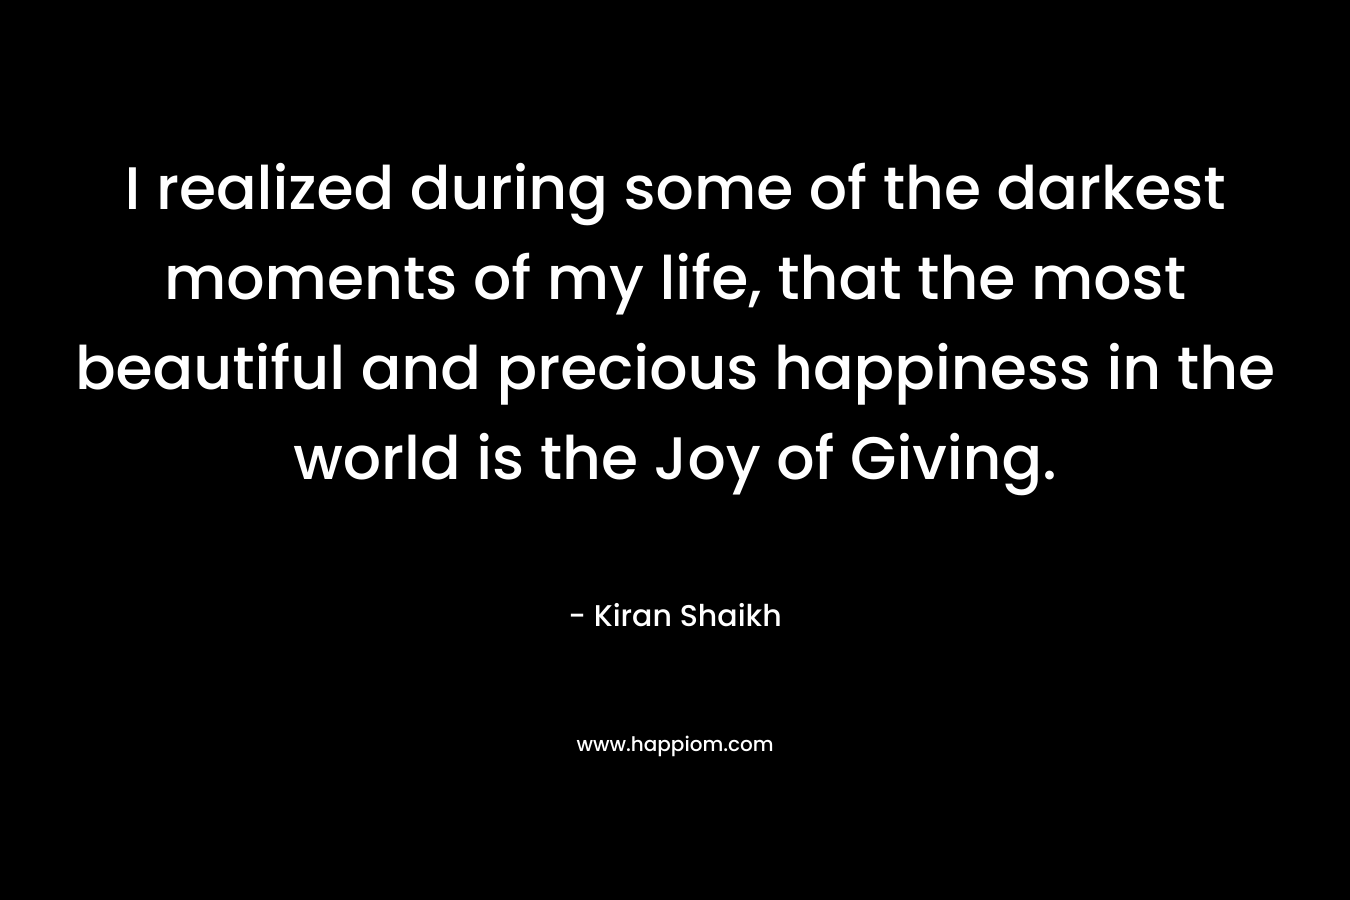 I realized during some of the darkest moments of my life, that the most beautiful and precious happiness in the world is the Joy of Giving. – Kiran Shaikh